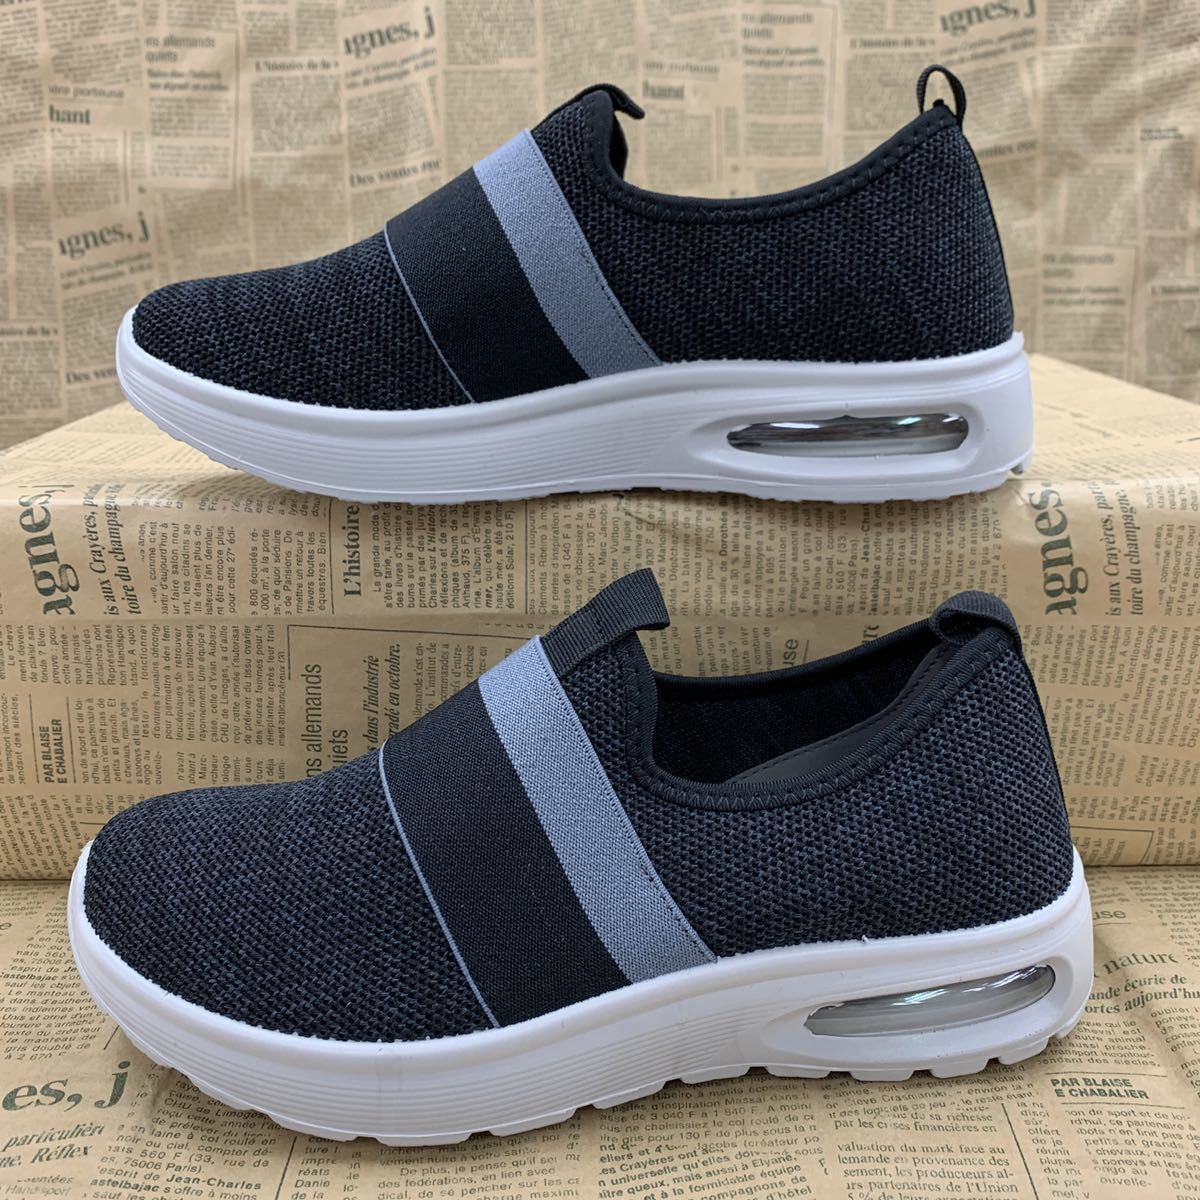  new goods lady's 23.0cm light weight air saw ru sneakers gum band slip-on shoes sport sneakers running shoes black black osw7248